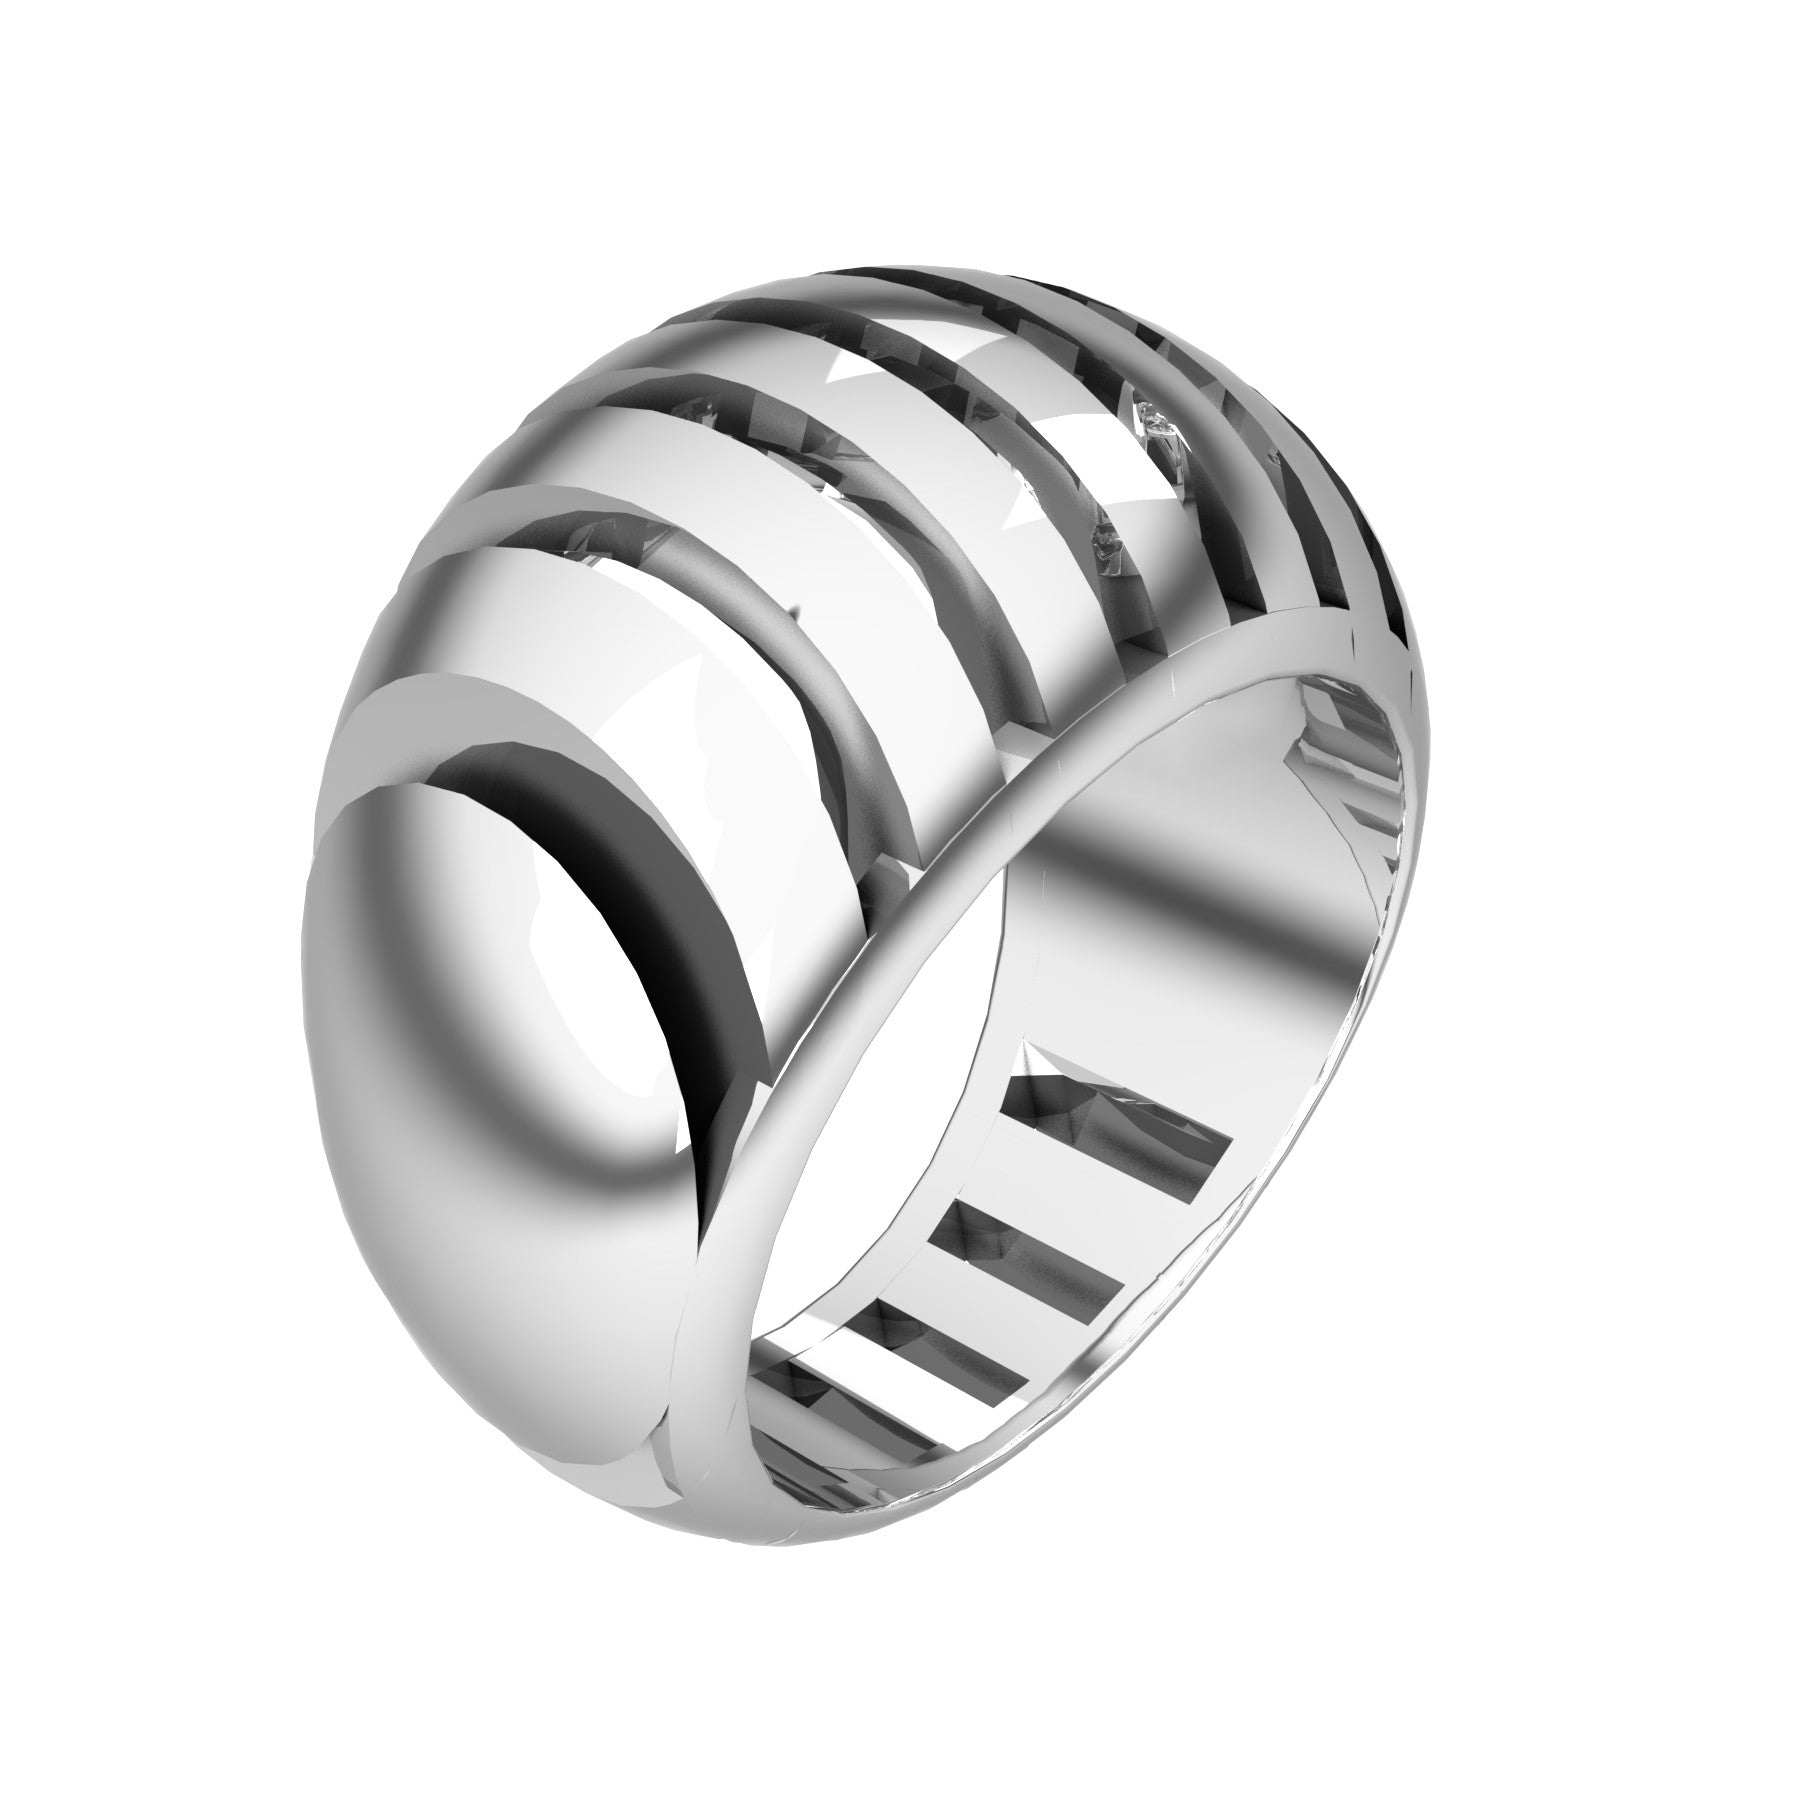 split 4 ring, sterling silver, weight about 7,1 g. (0,25 oz), width 14,0 mm max